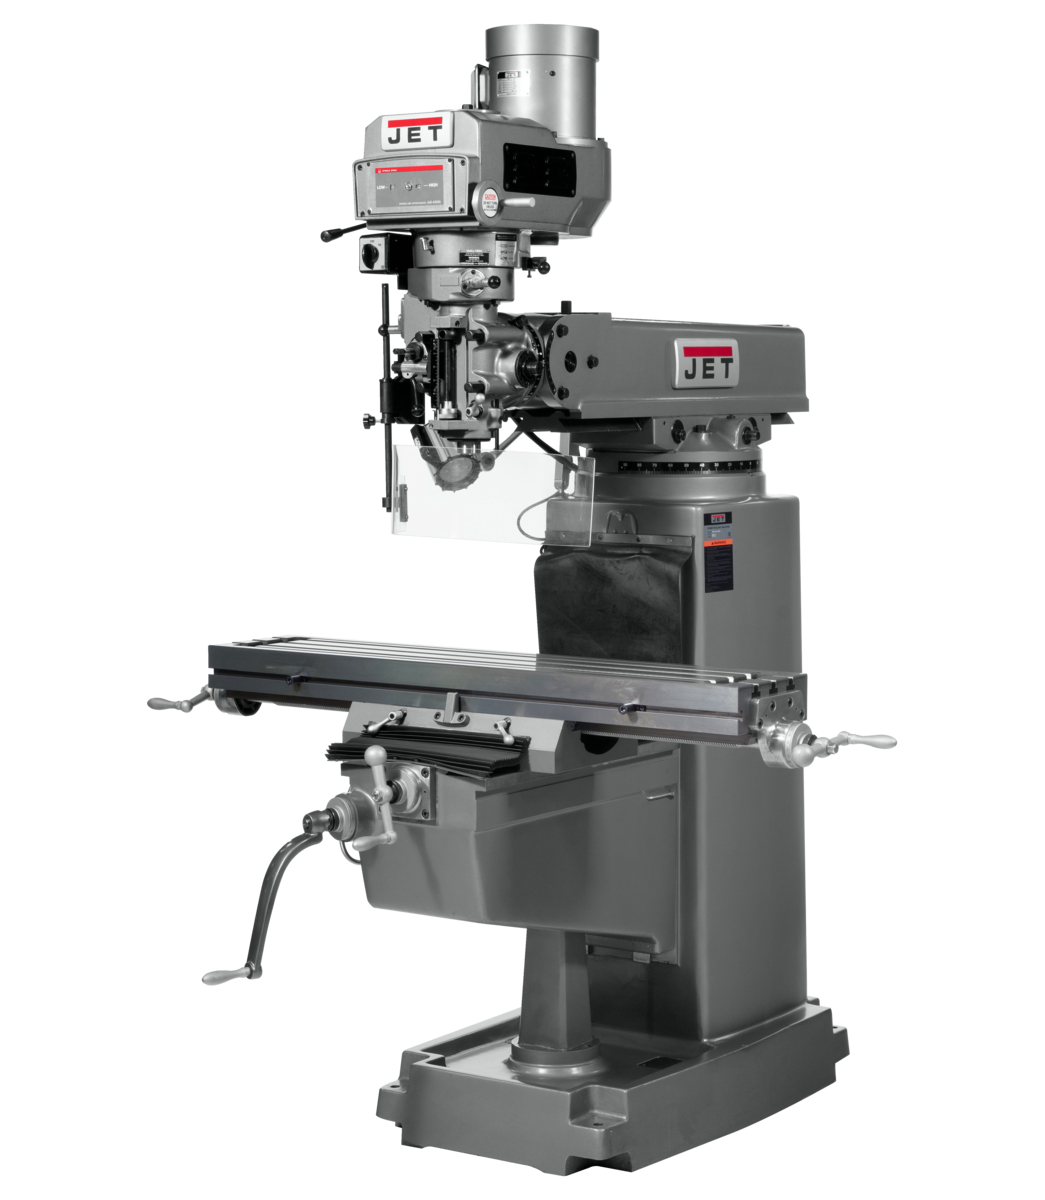 690158, JTM-1050 Mill with 3-axis ACU-RITE 203 DRO and X Powerfeed Installed, Jet, Metalworking, Milling, Vertical Mills